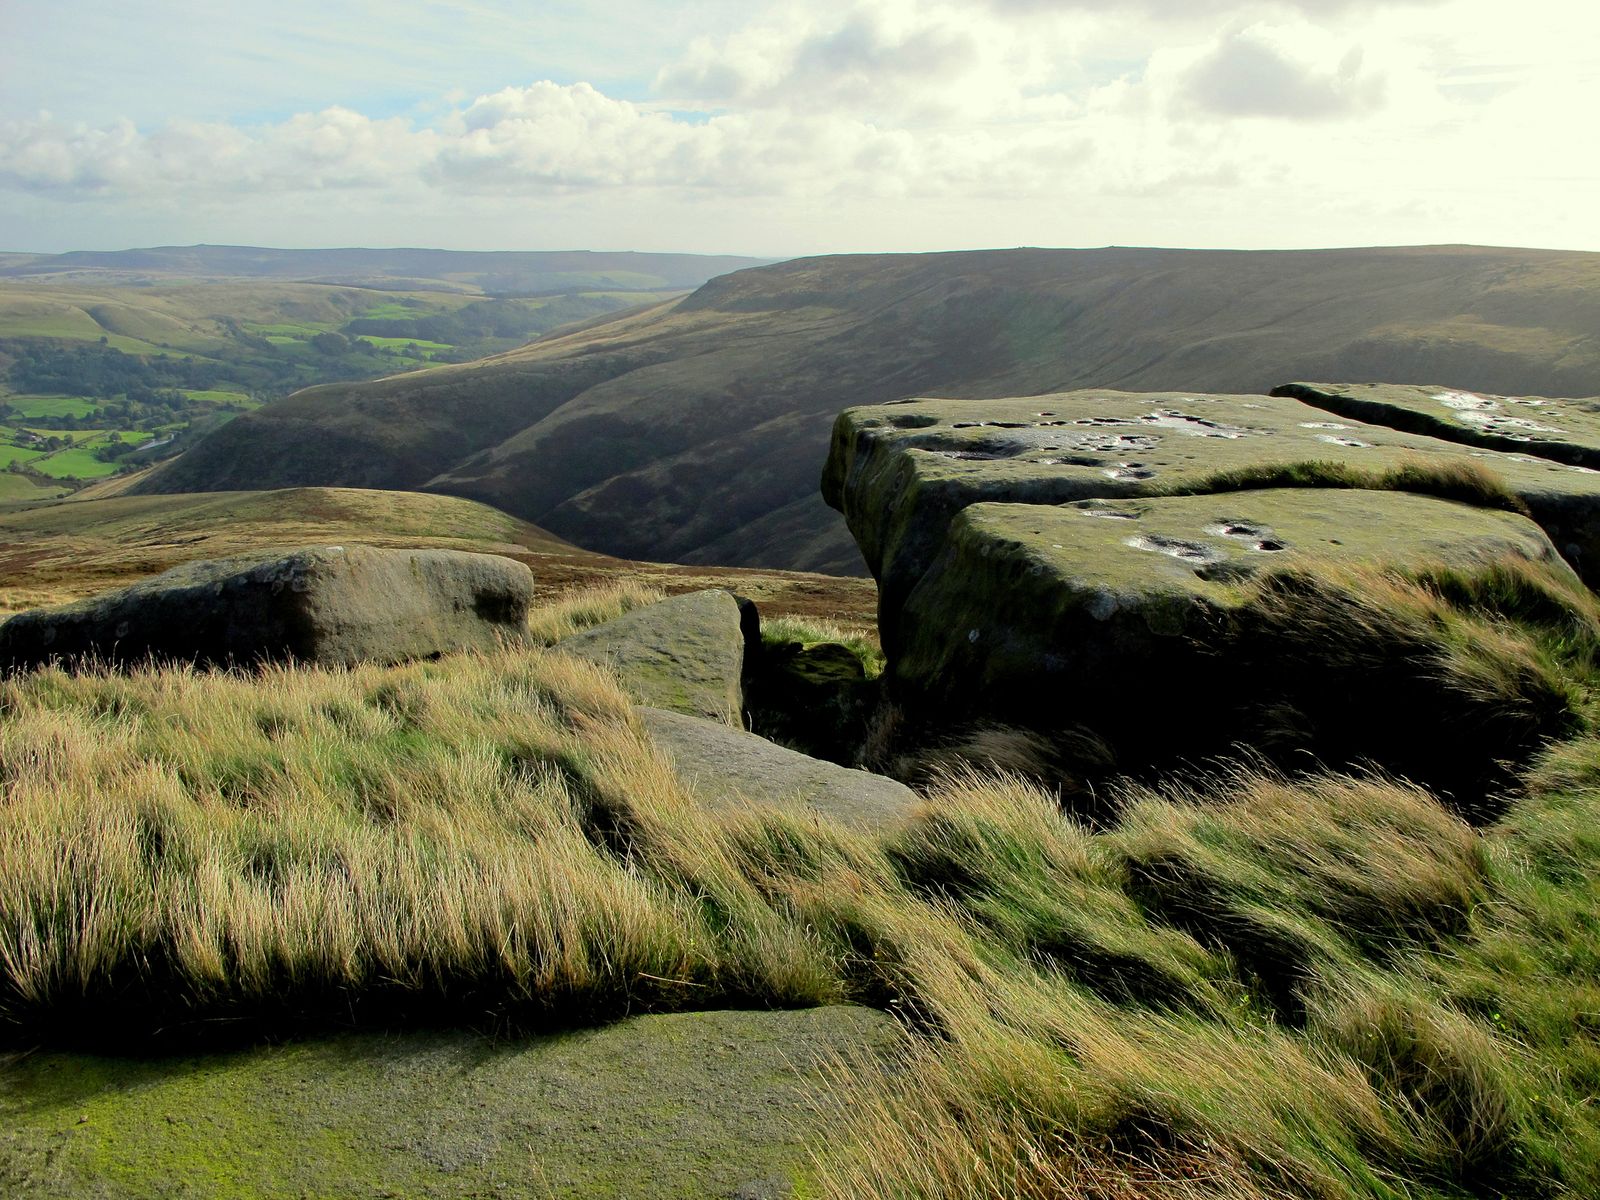 A view of Kinder Scout